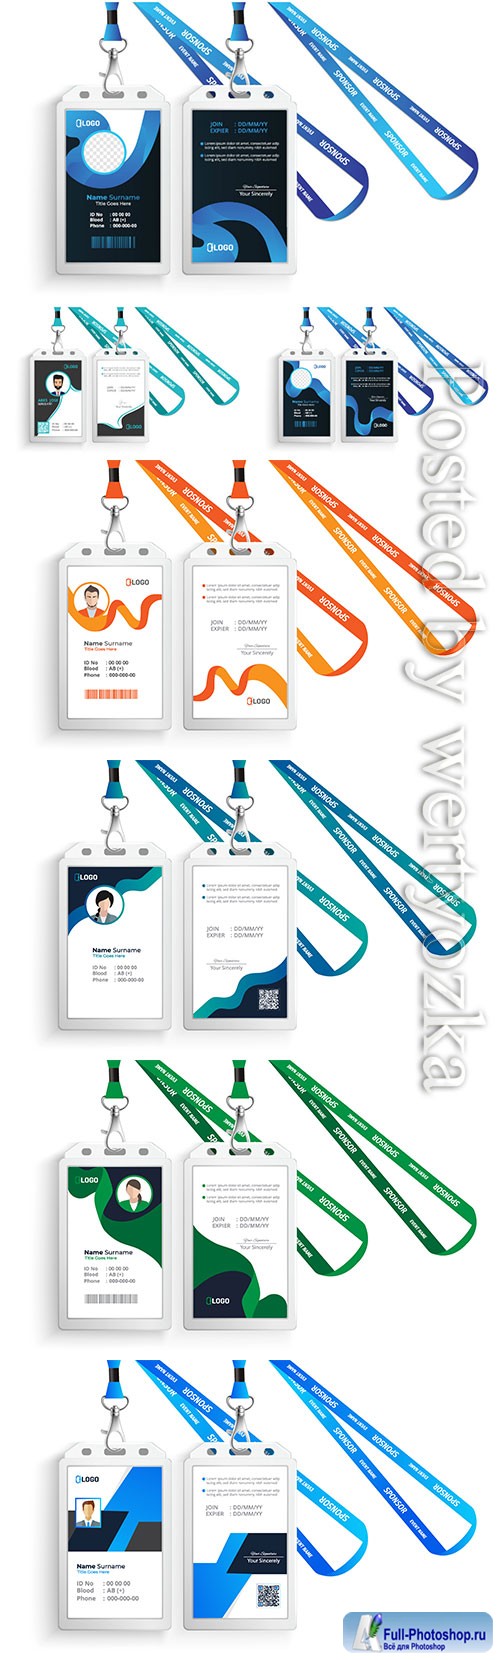 Id vector card with lanyard set isolated illustration